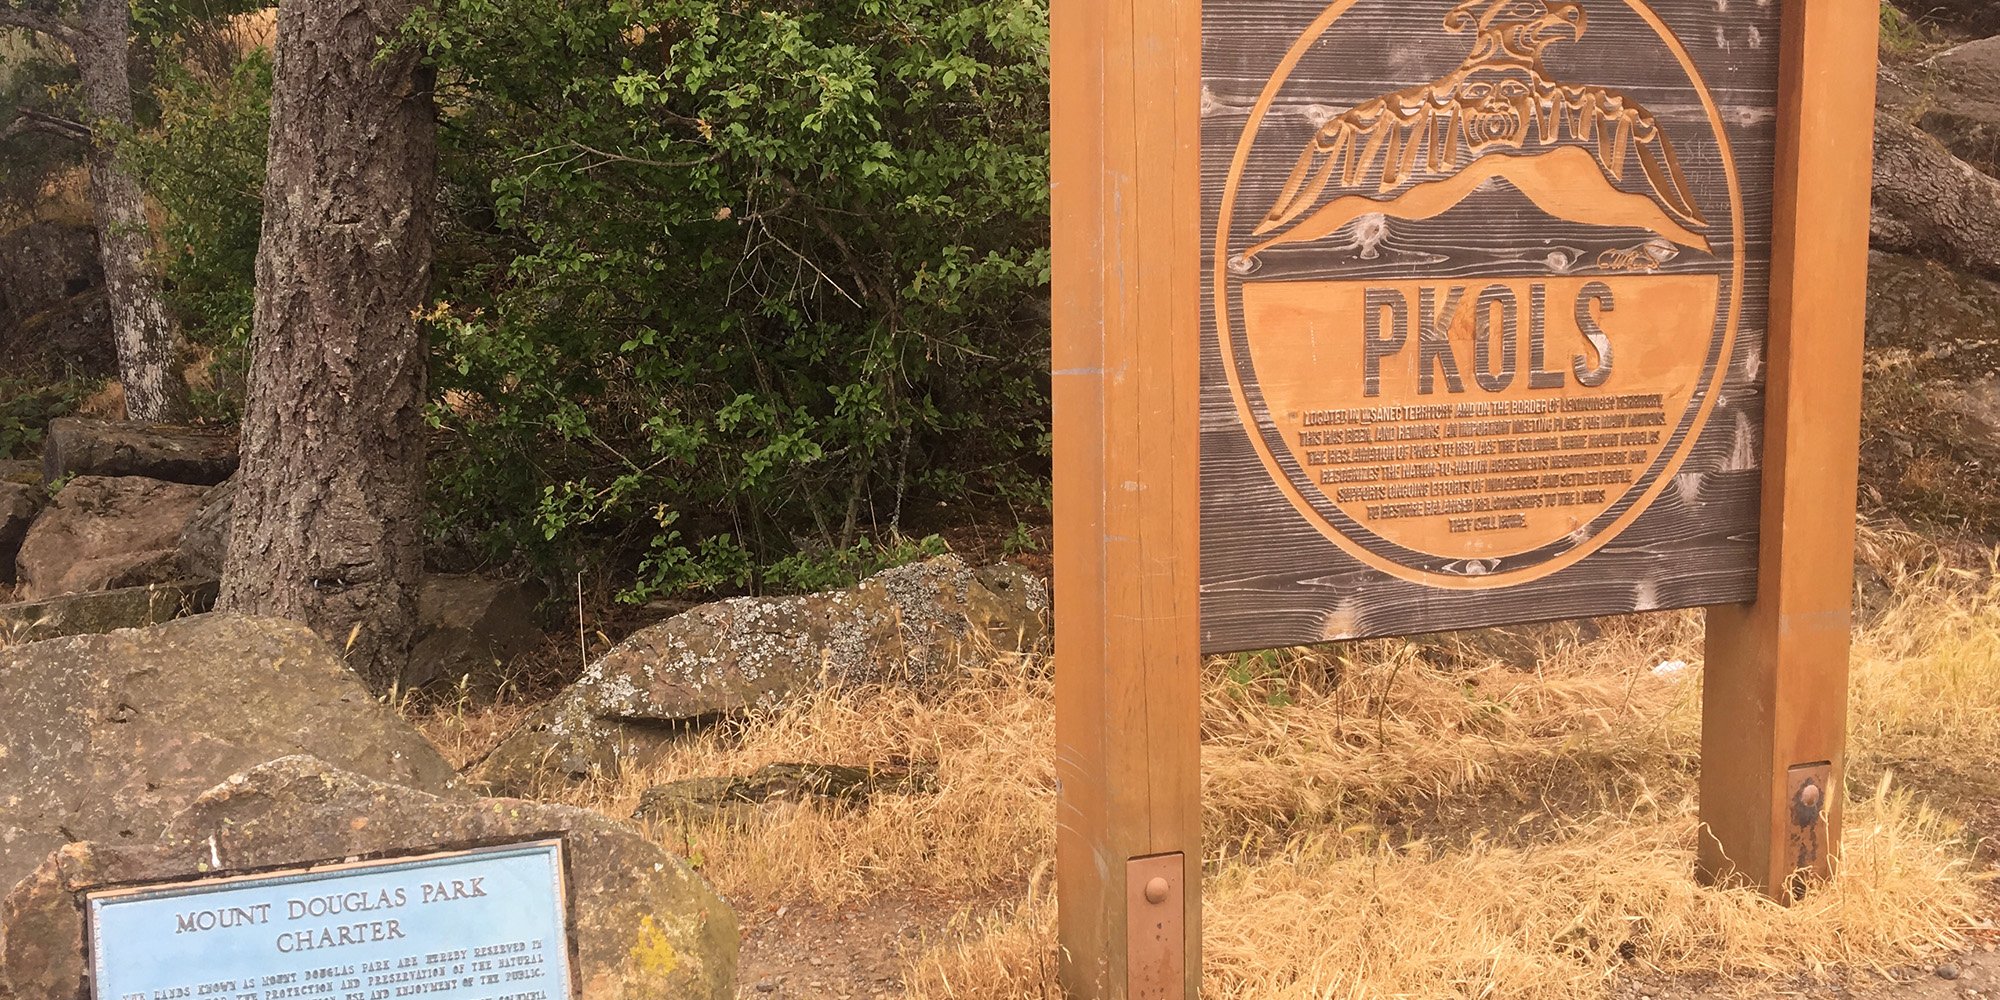 Two signs at the top of Mt. Doug/Pkols in Victoria, BC; one comes from the Canadian government, who refer to the mountain as Mt. Doug, while the other, newer, sign refers to the mountains traditional name, Pkols.